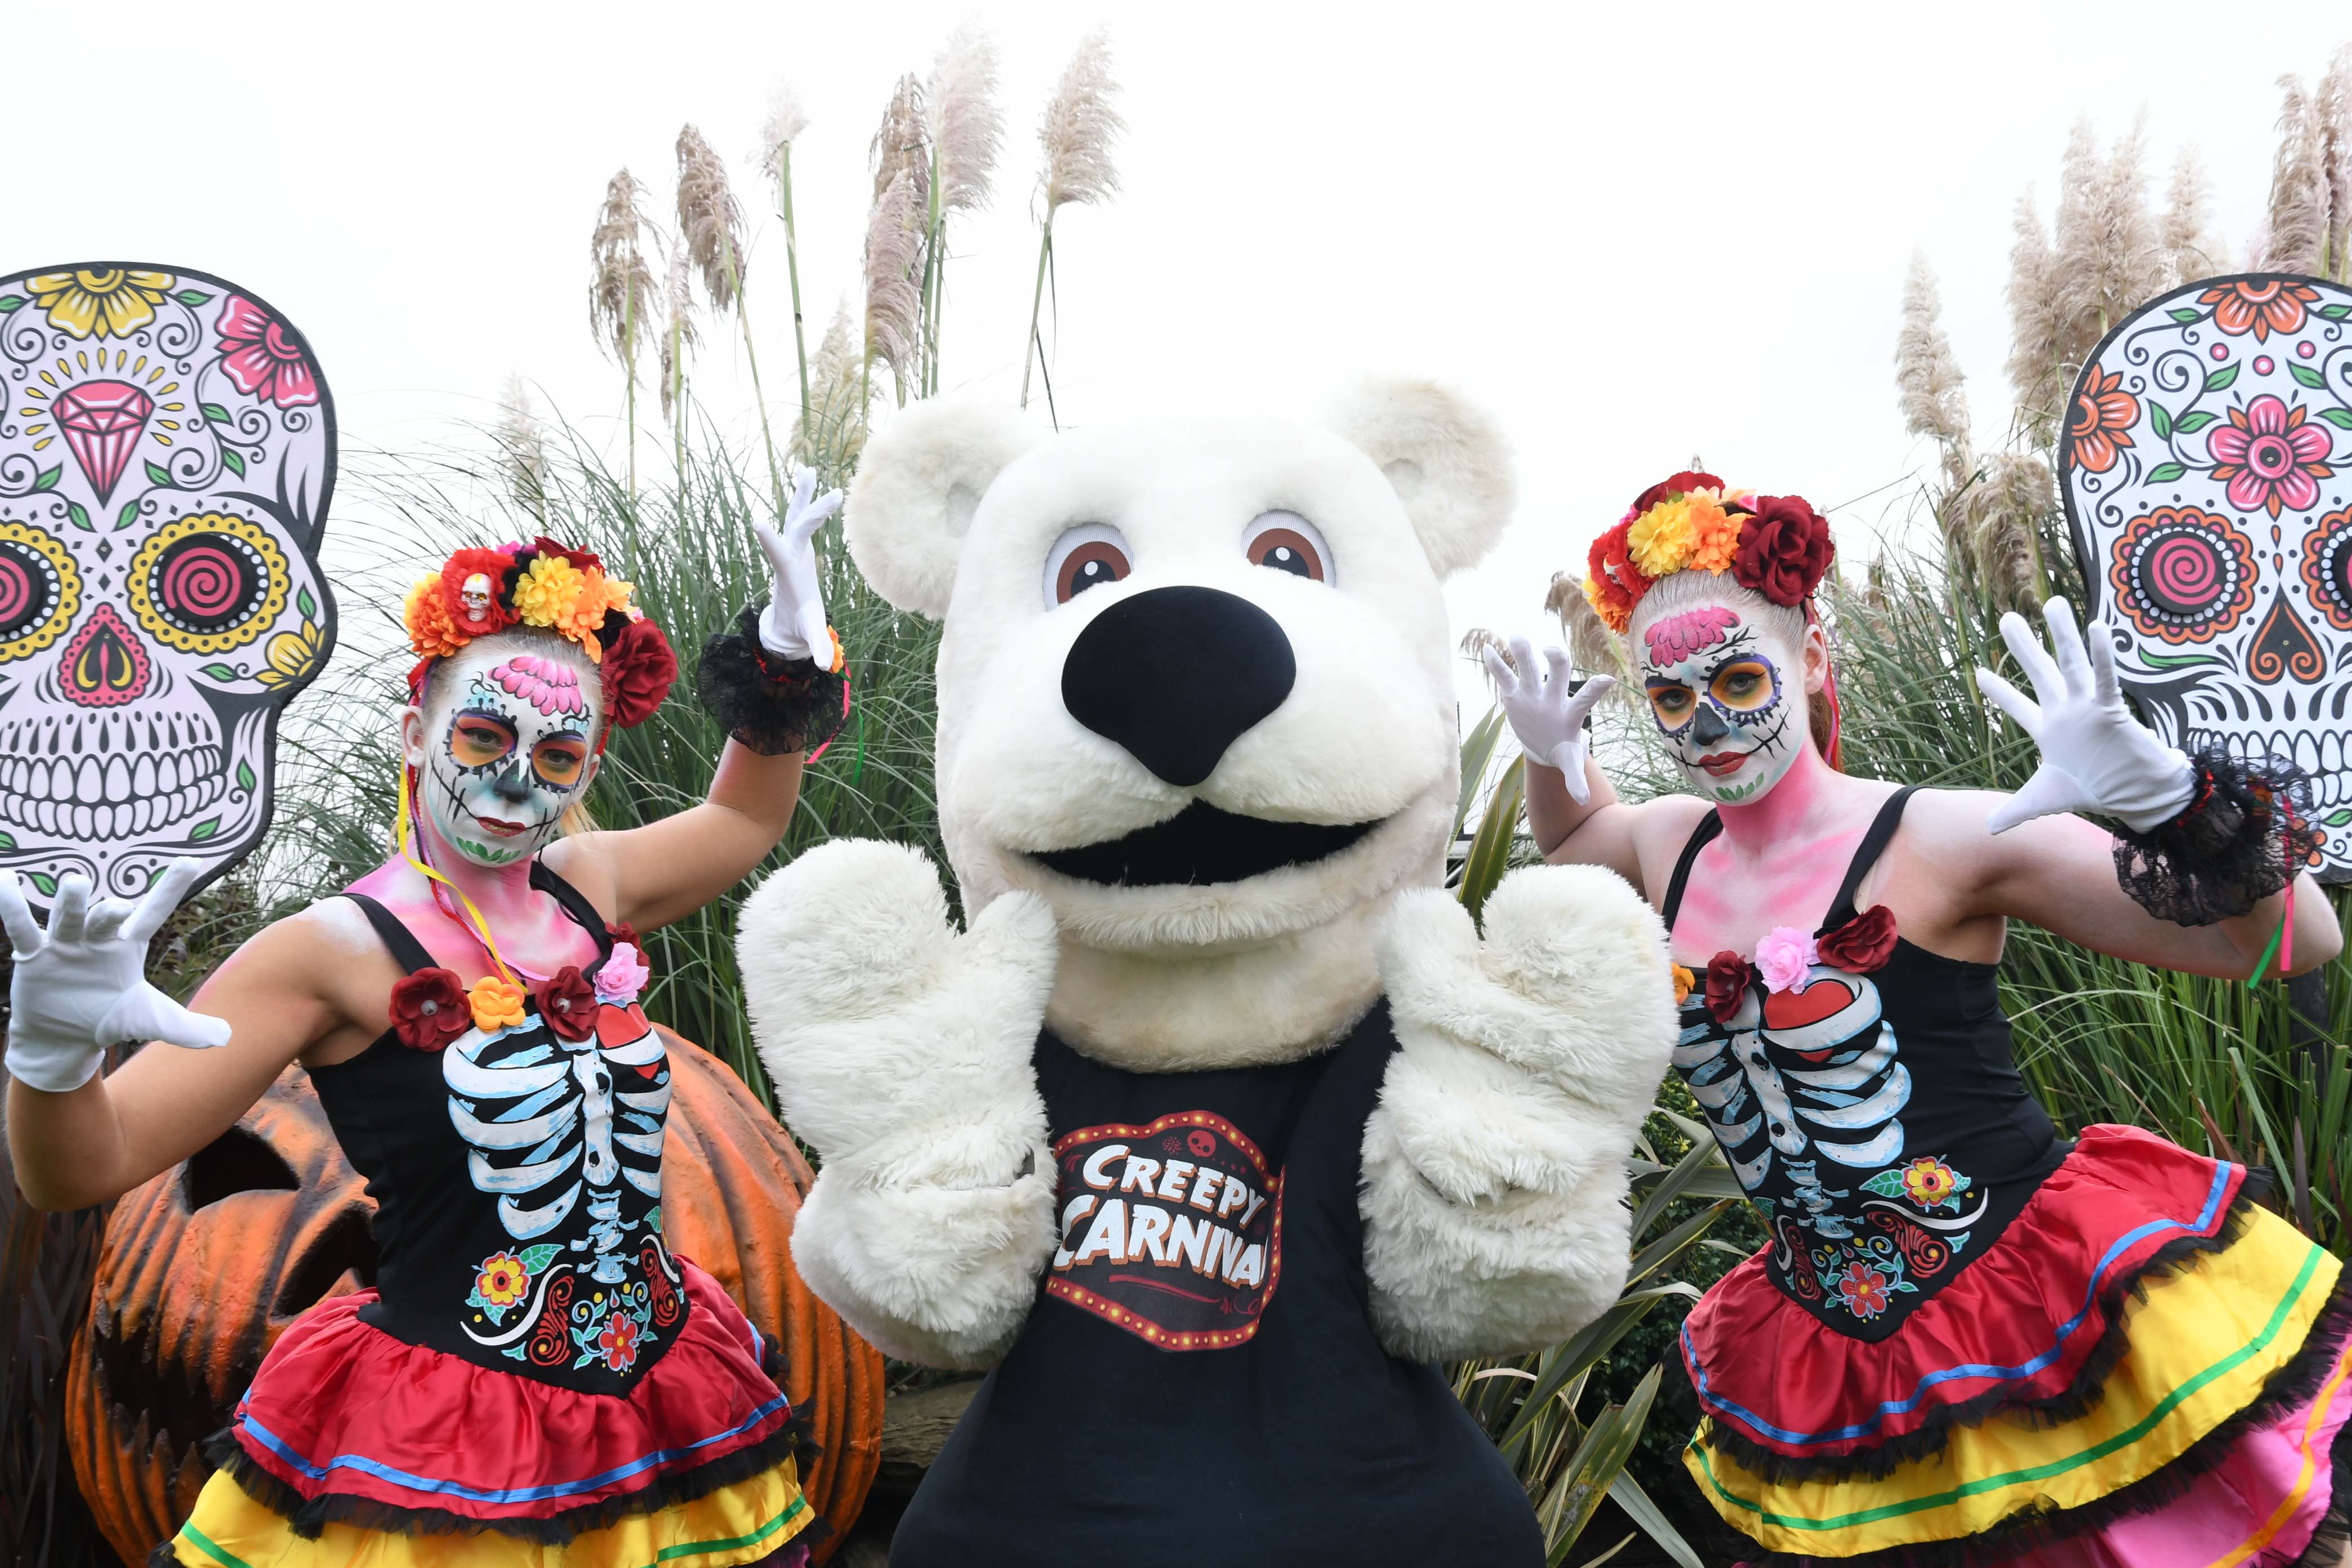 Yorkshire Wildlife Park Is Hosting A ‘Creepy Carnival’ For Halloween Next Month